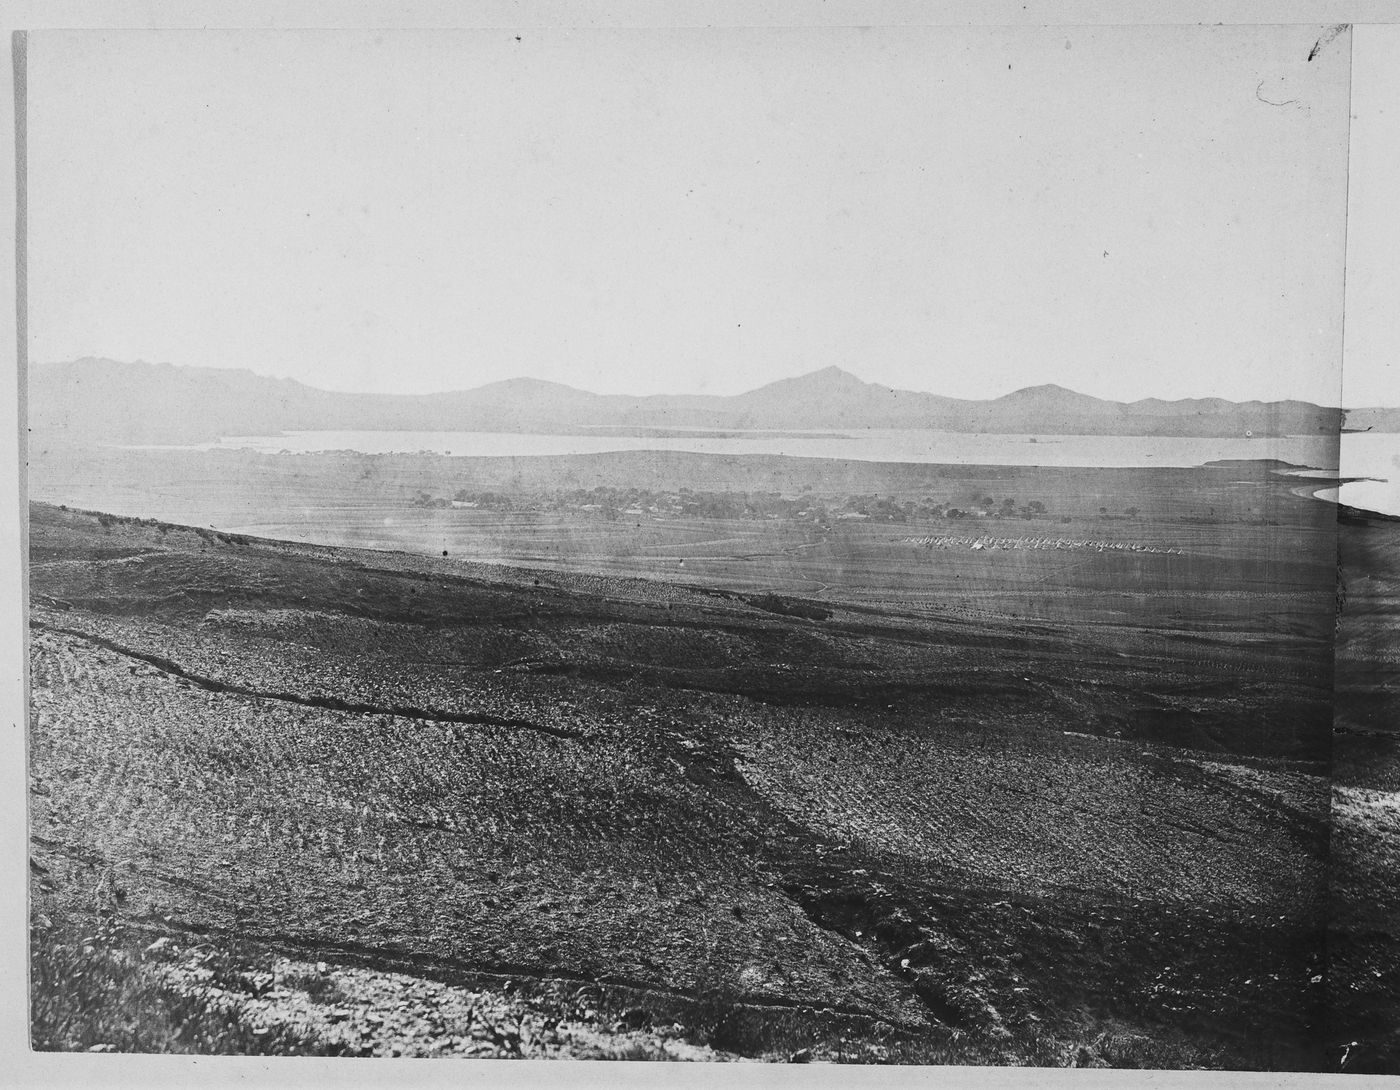 View of Victoria Bay, adjacent to Talien Bay (now Dalian Wan), showing military camps and farmland, near Ch'ing-ni-wa (now part of Dalian), China